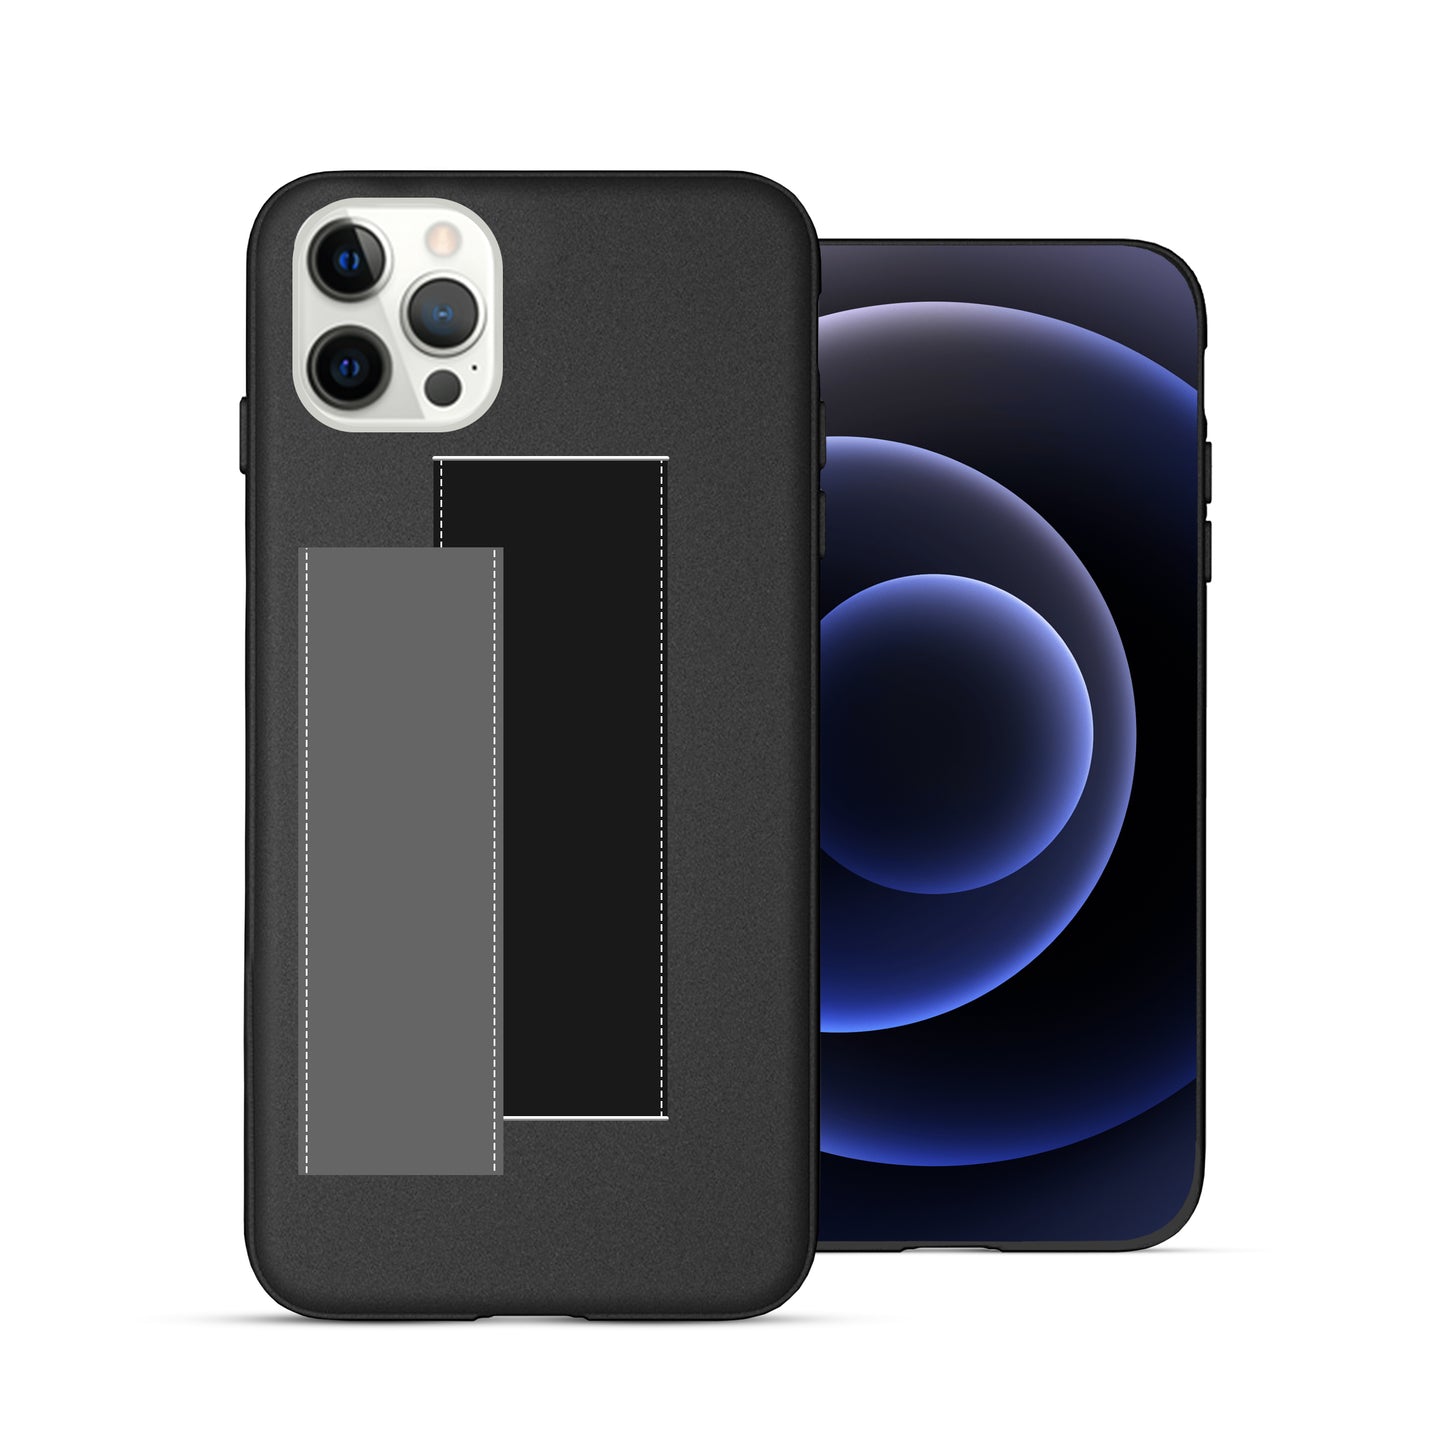 Finger Loop Phone Case For iPhone 11 Pro Blue With Black & Grey Strap